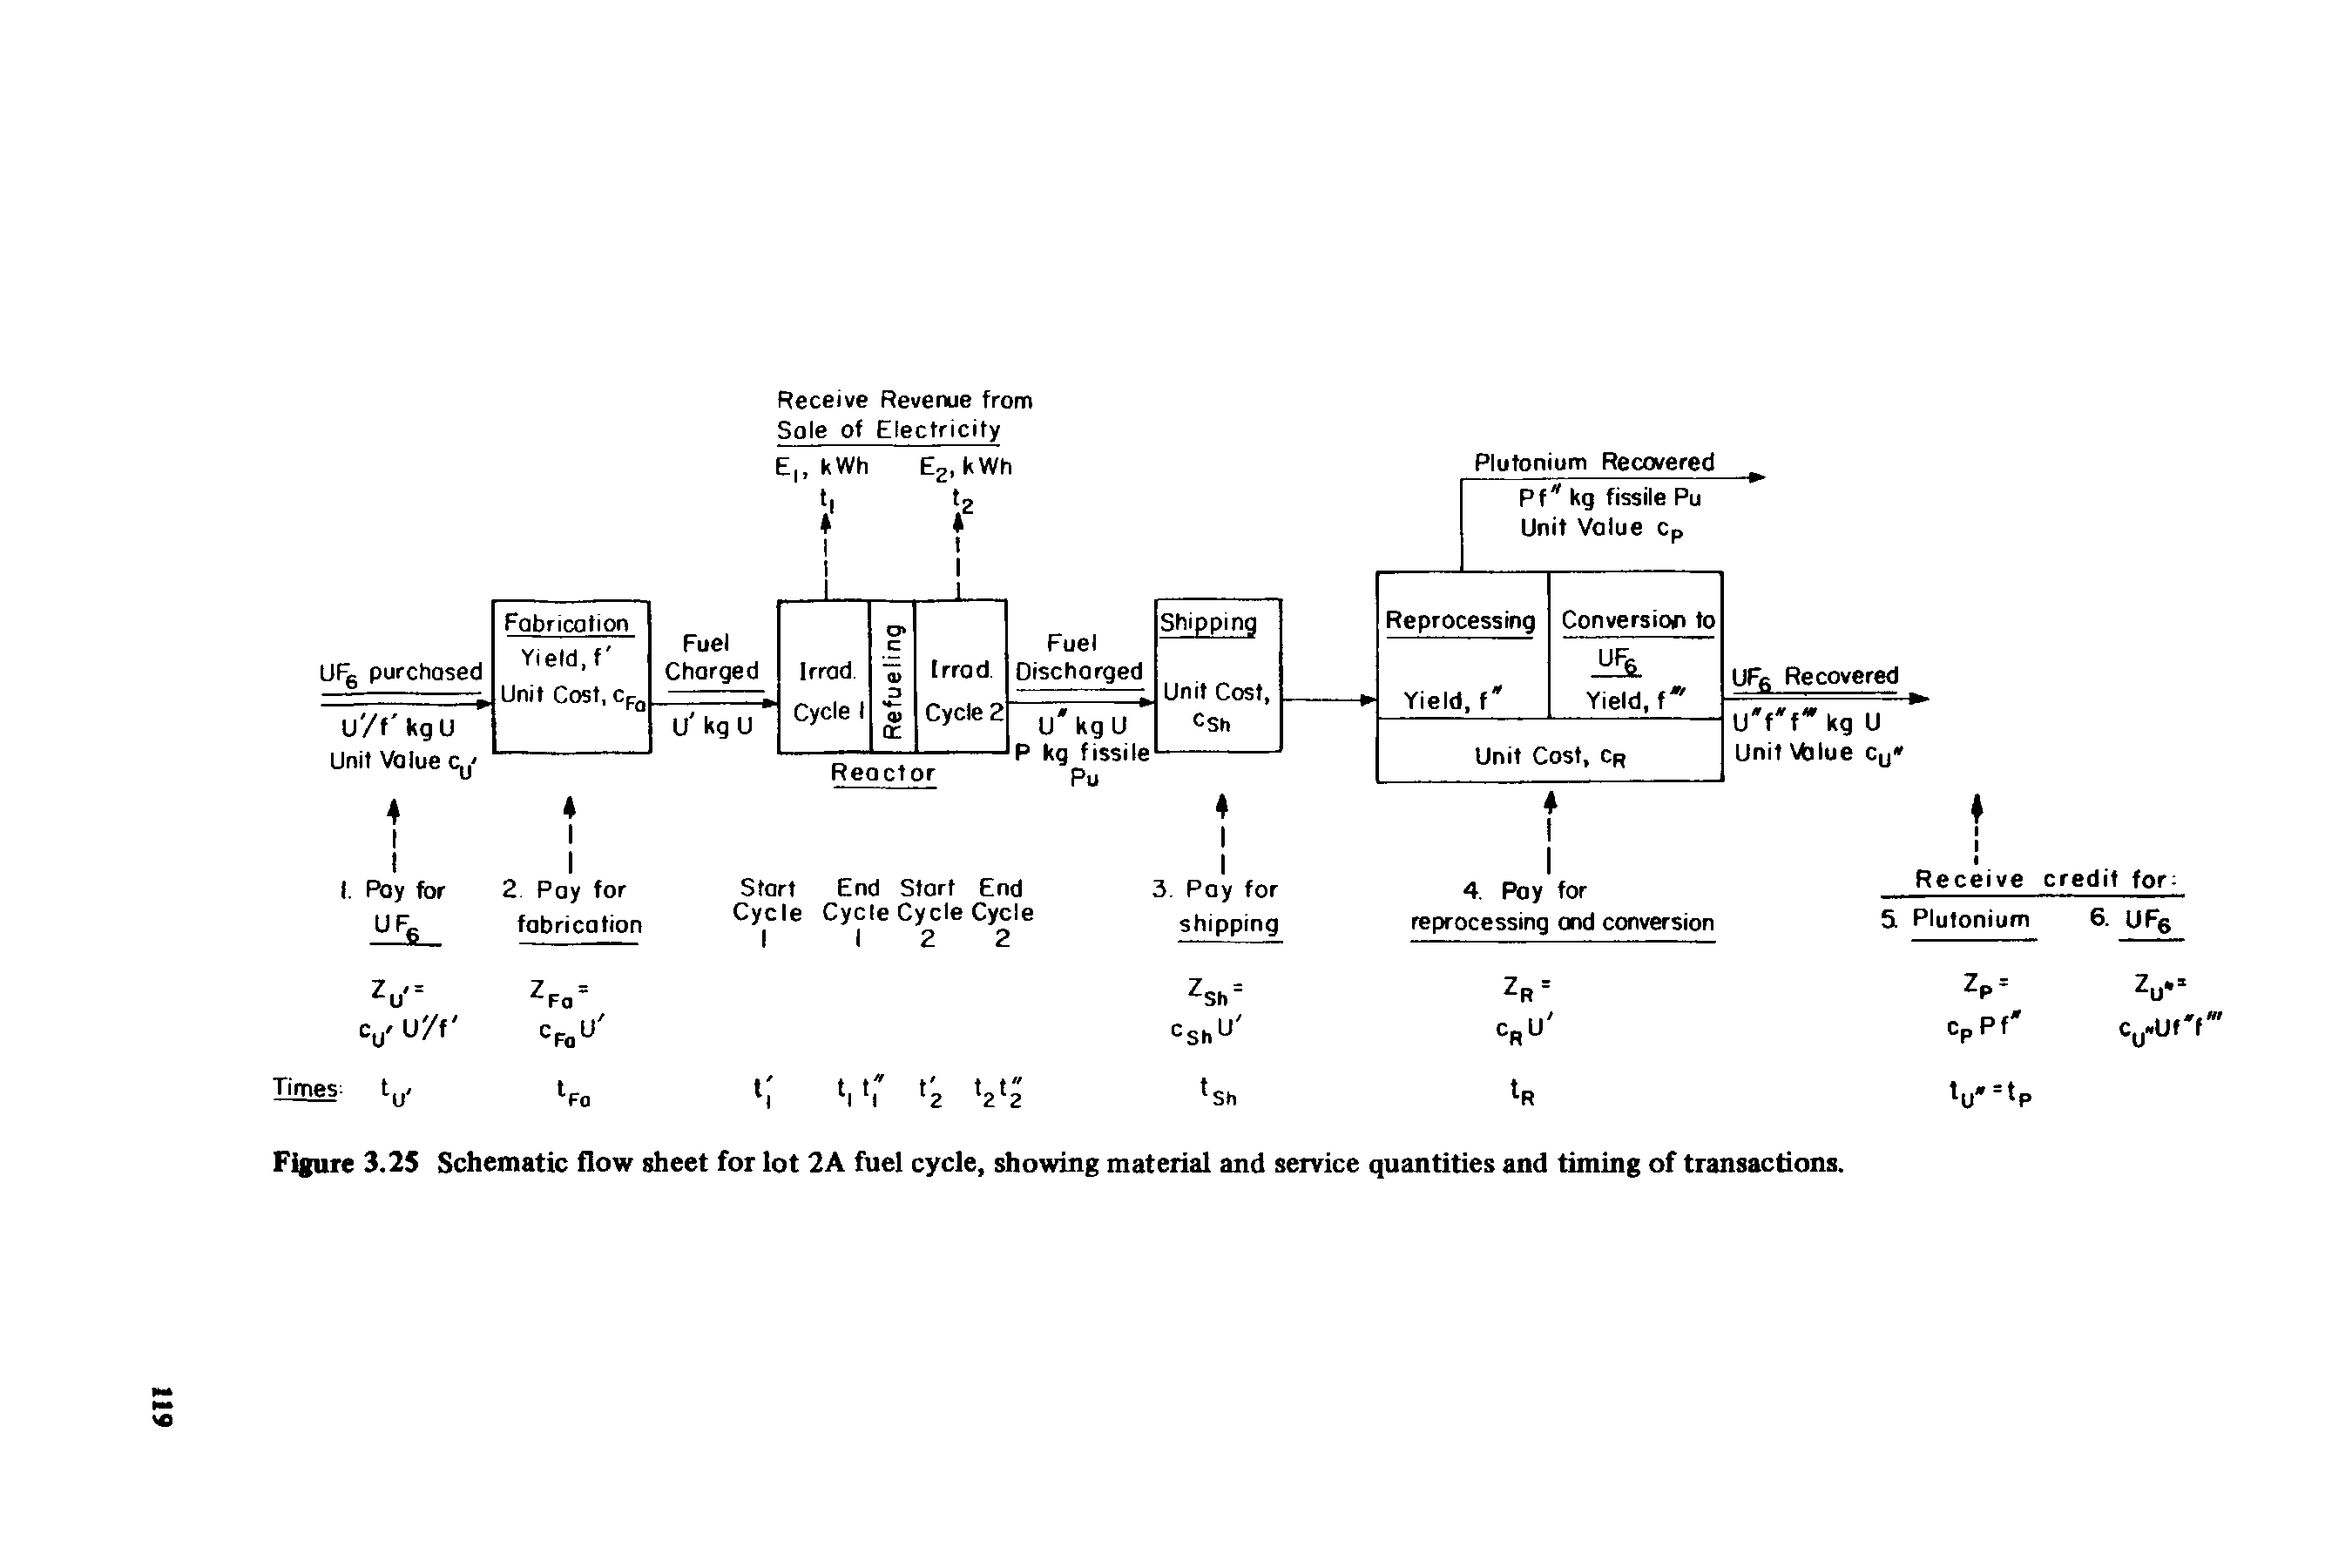 Figure 3.25 Schematic flow sheet for lot 2A fuel cycle, showing material and service quantities and timing of transactions.